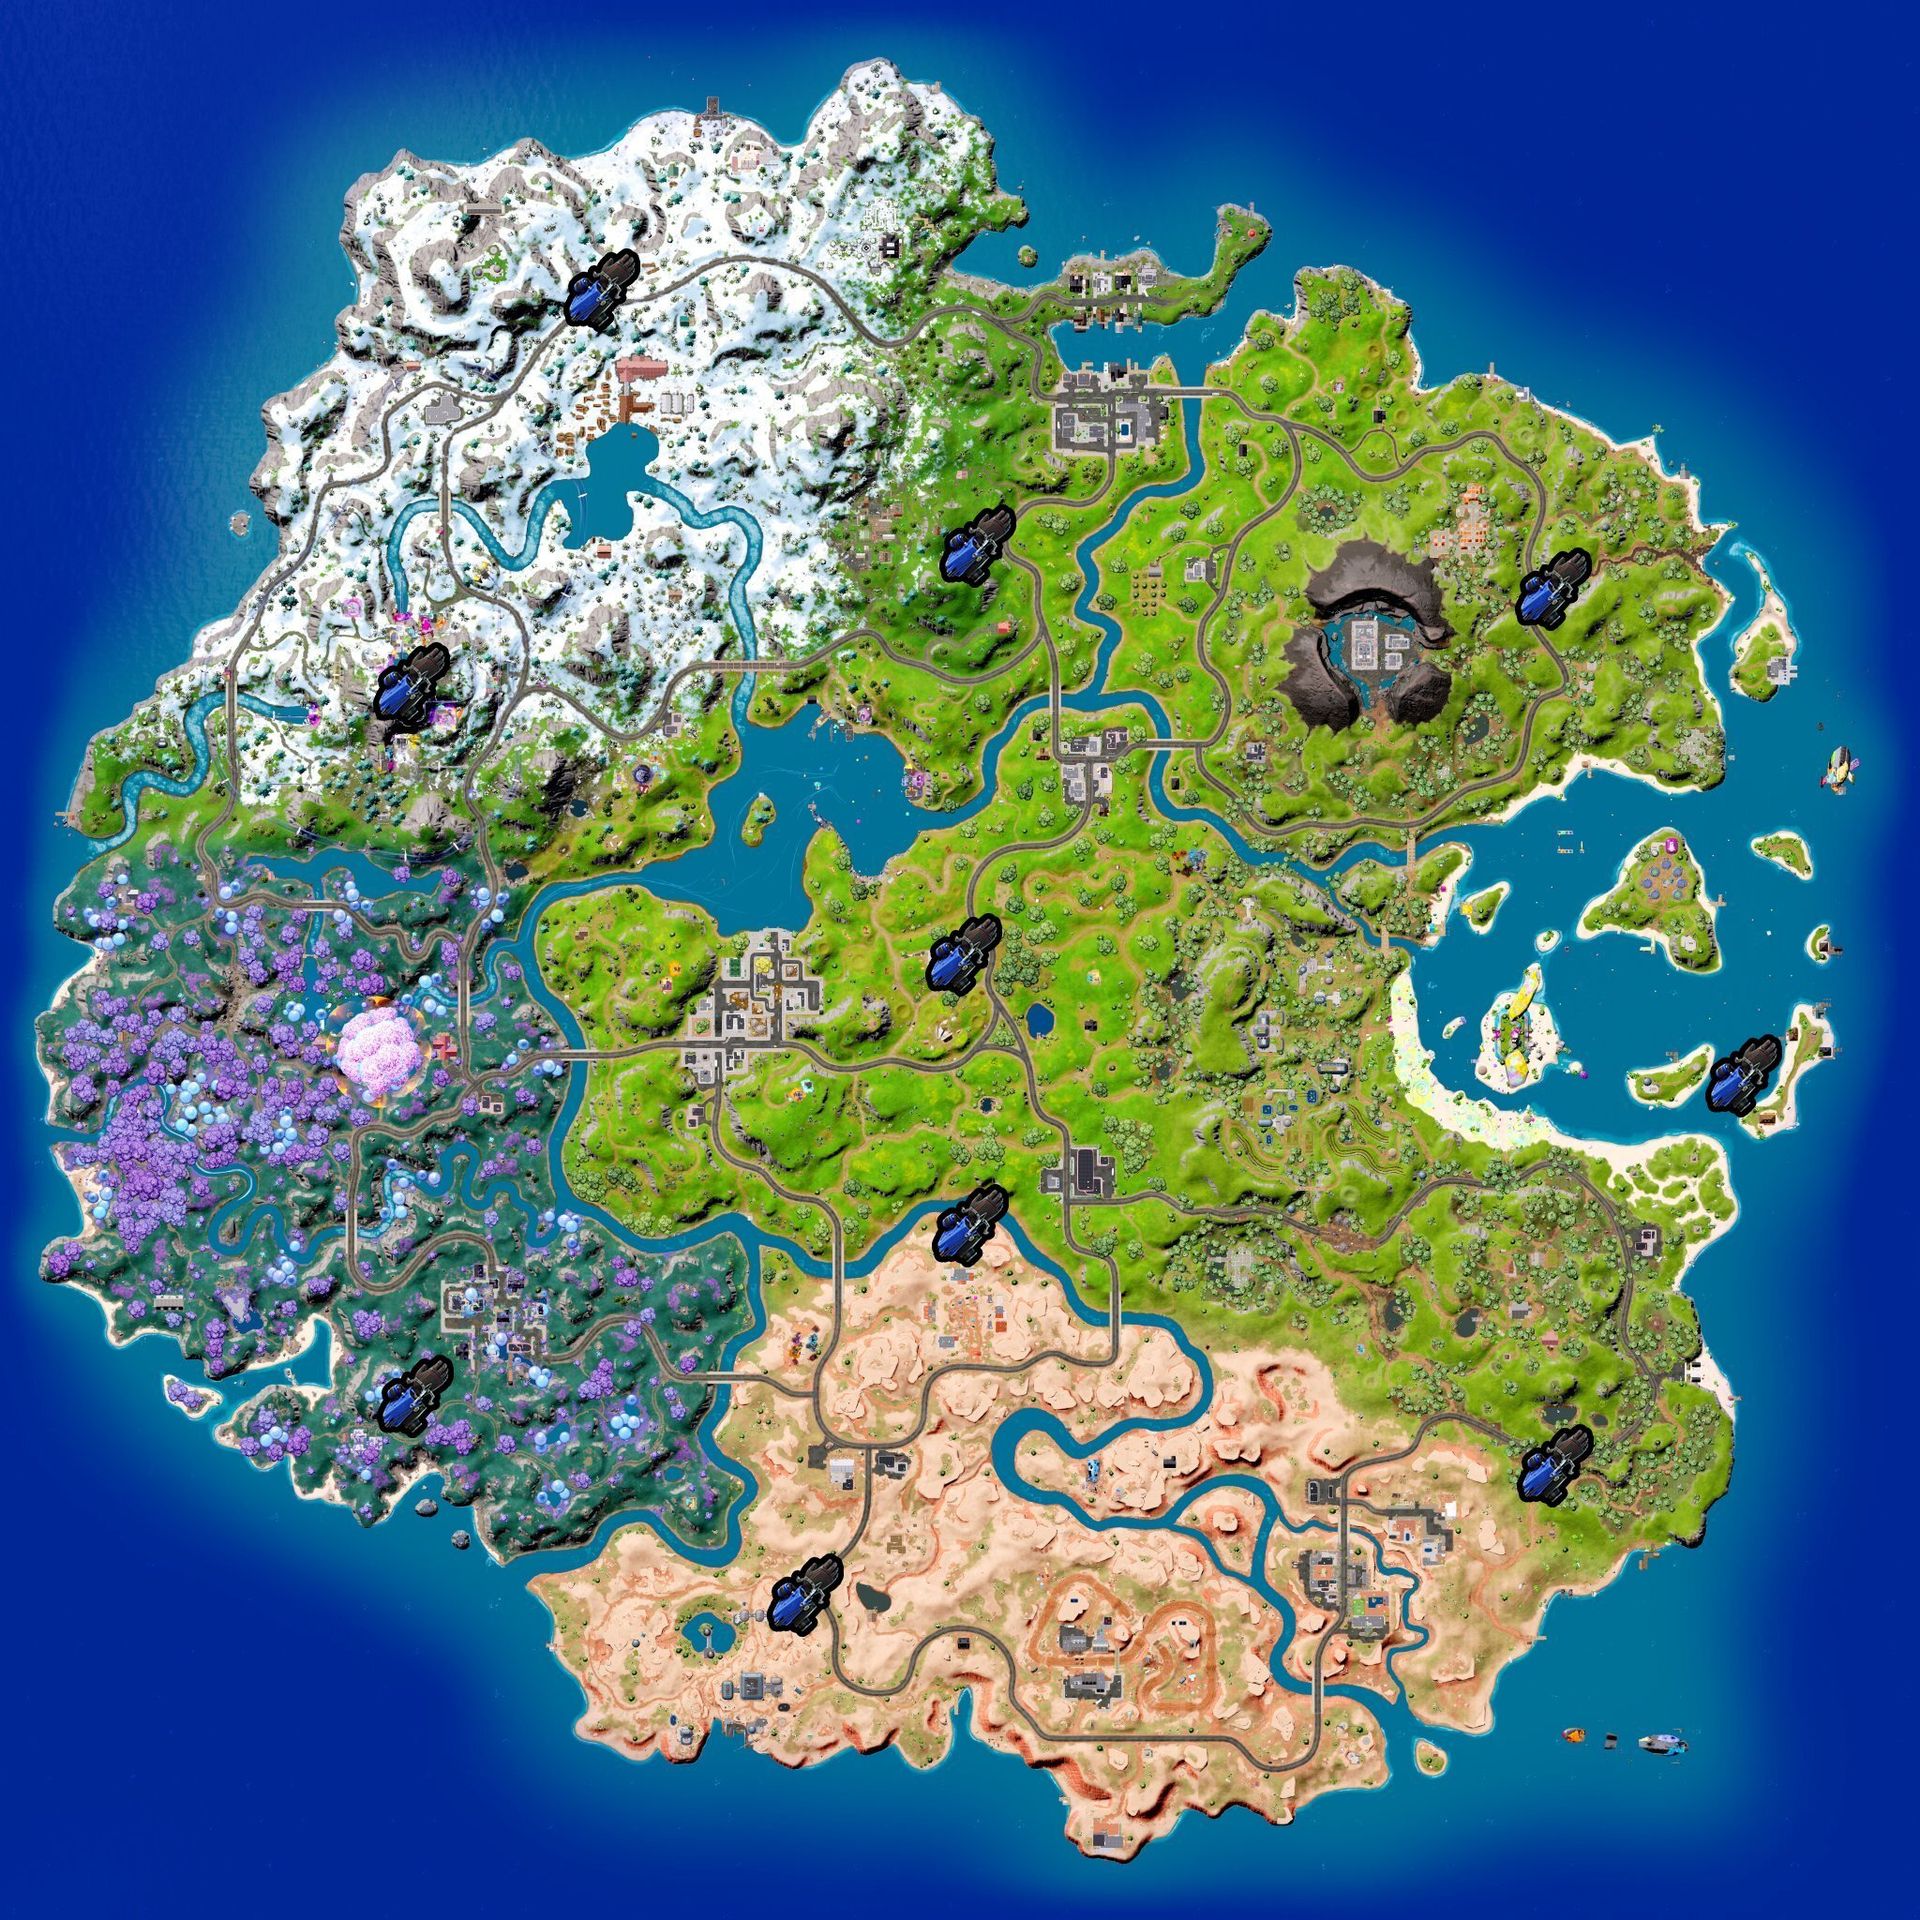 Below we are going to show you all Fortnite Grapple Glove locations and how to use them in the game.